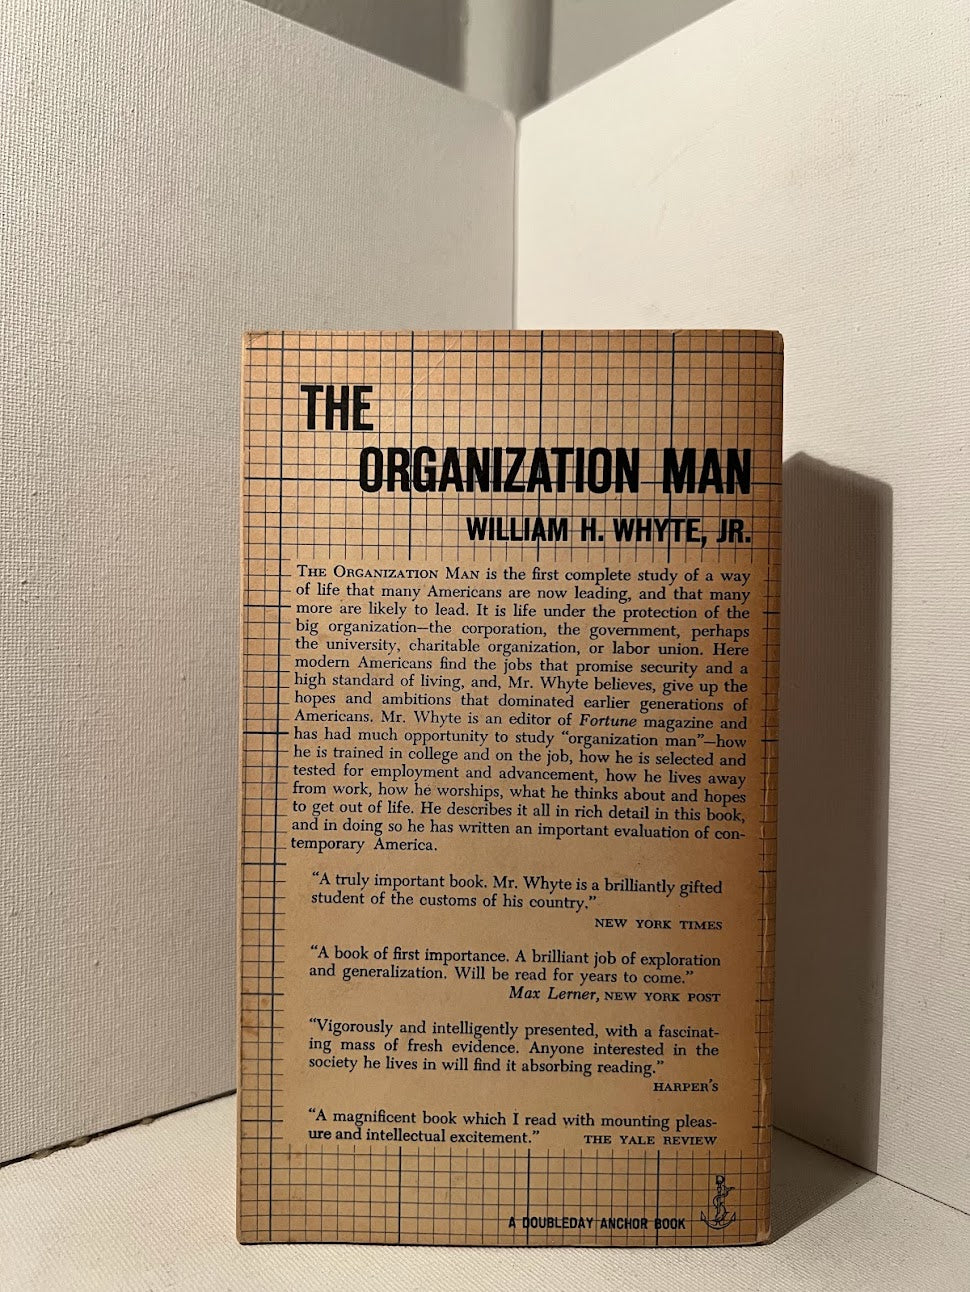 The Organization Man by William H. Whyte